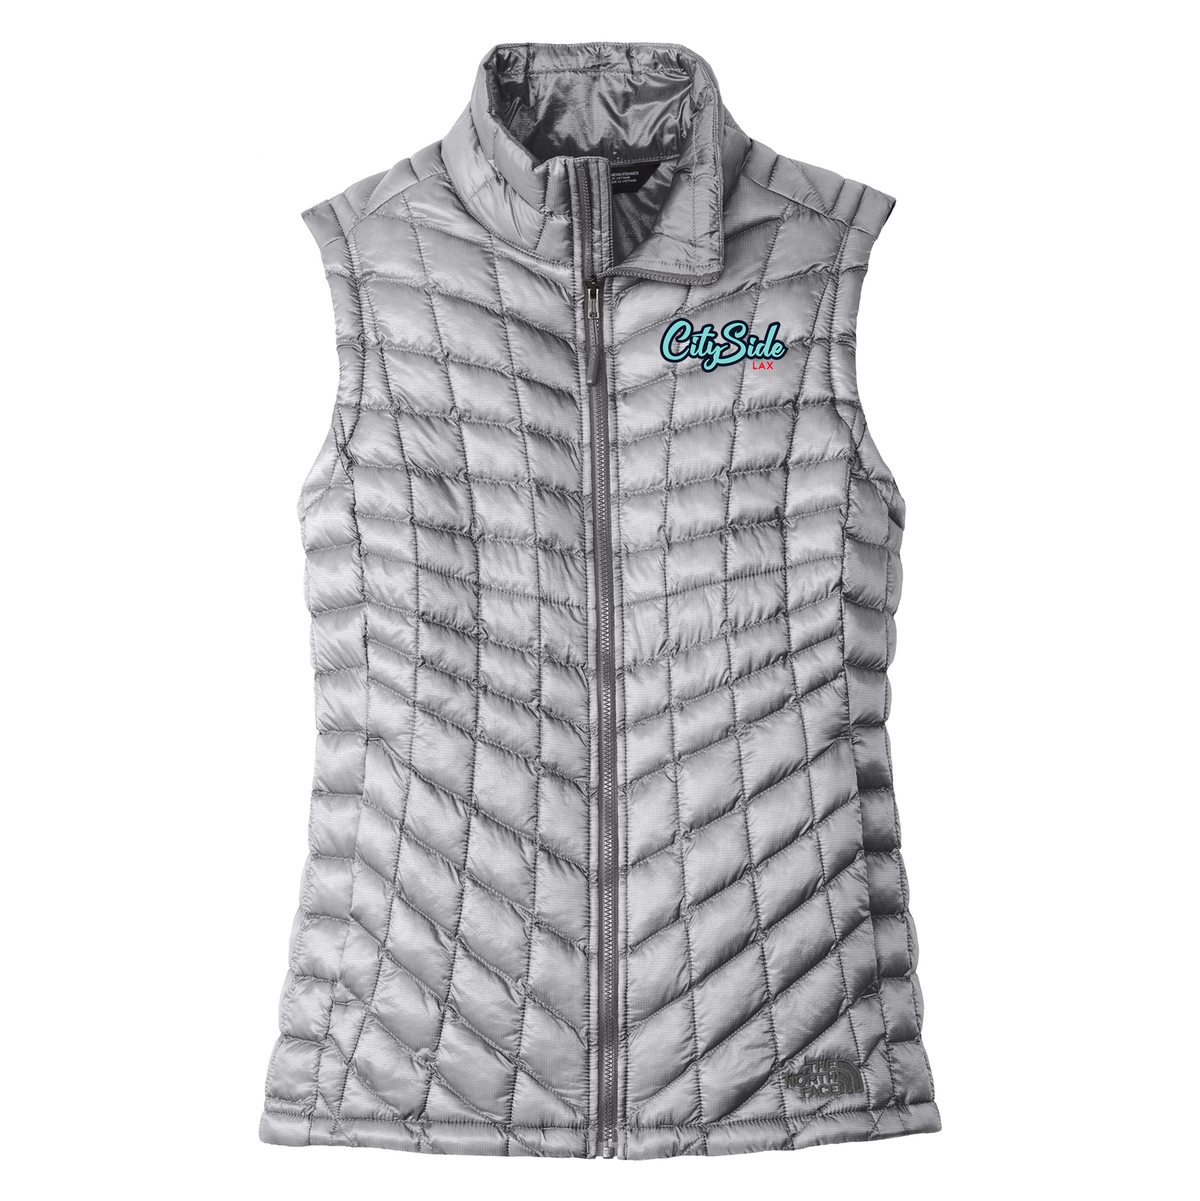 CitySide Lacrosse The North Face Ladies Thermoball Vest